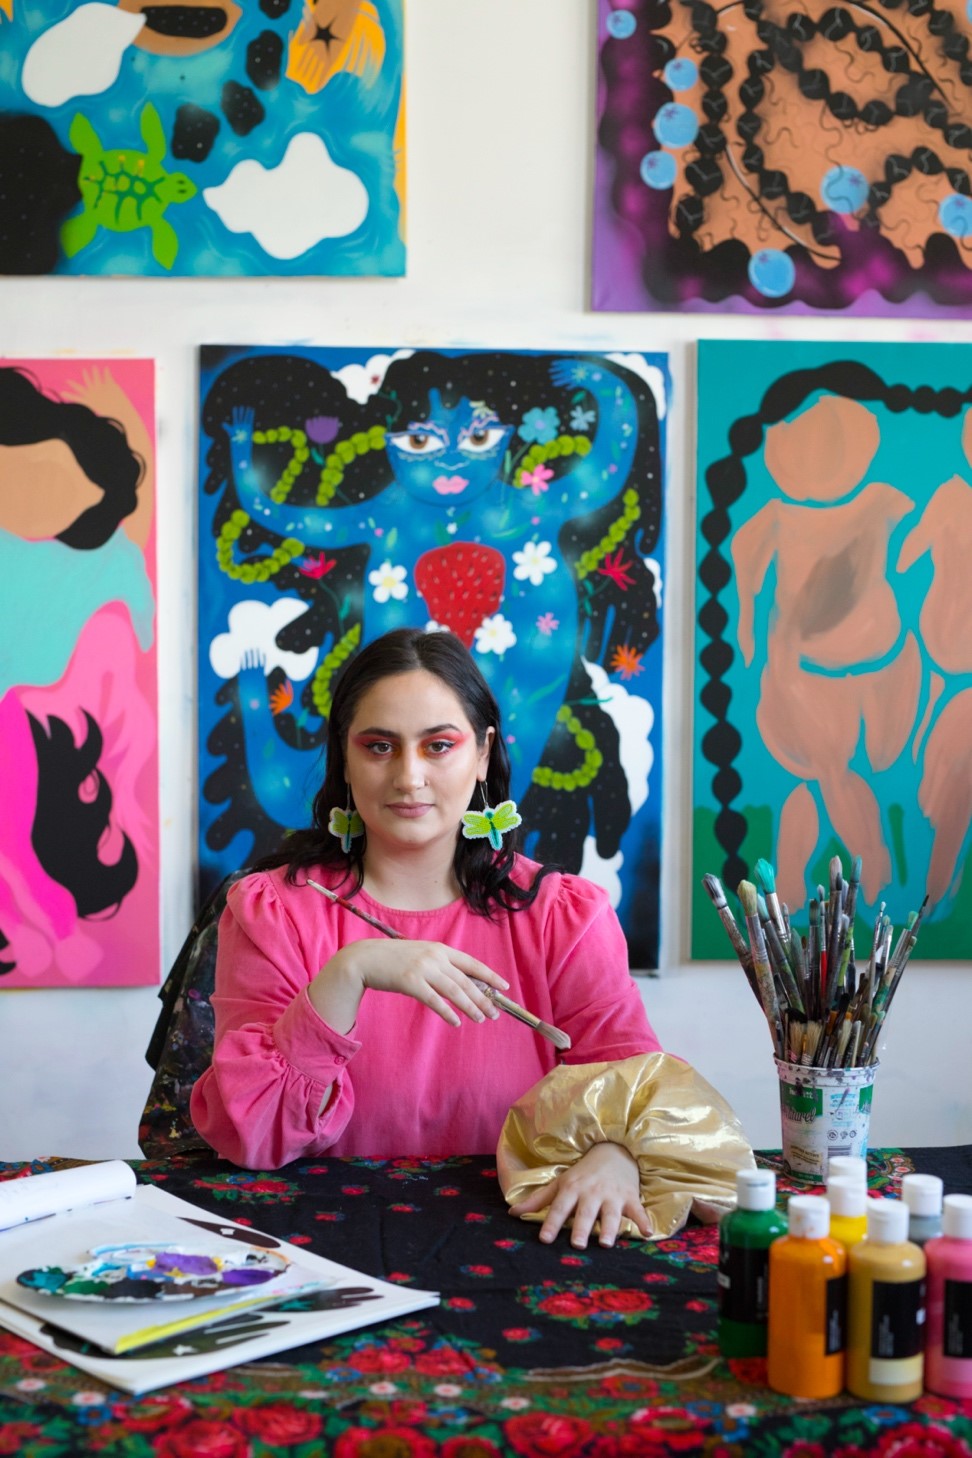 A person posing and surrounded by artwork